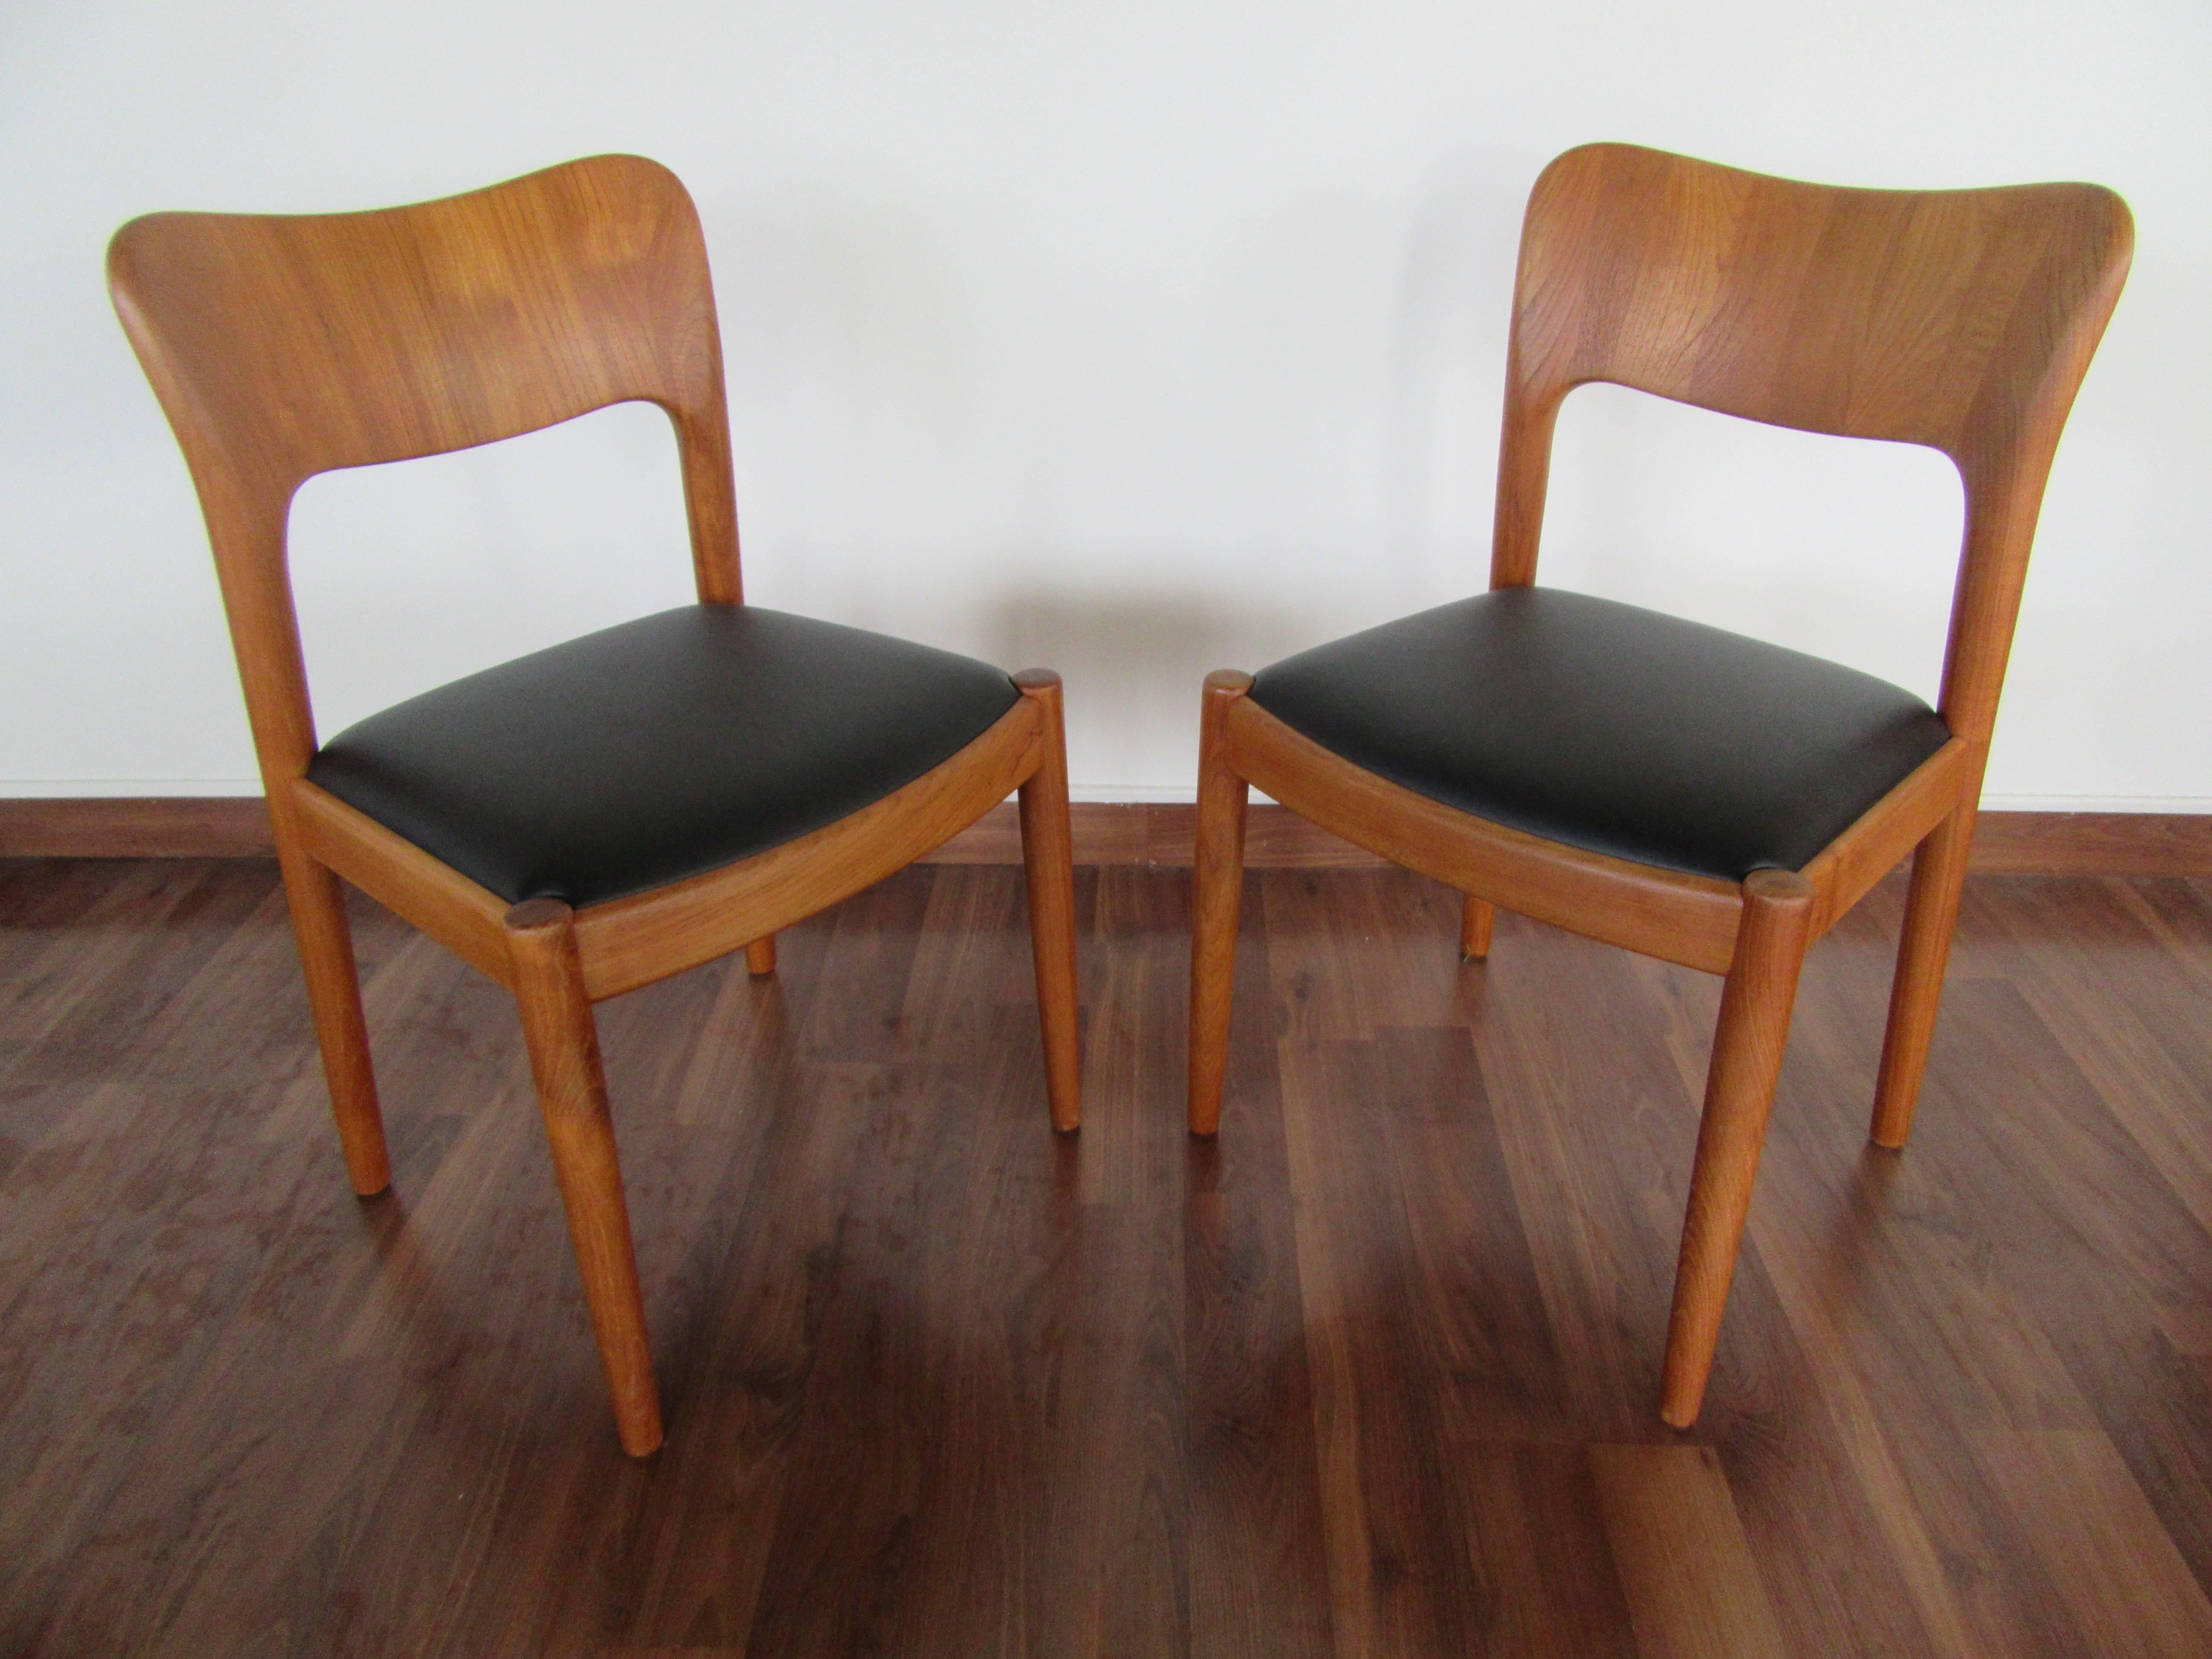 Set of Three Teak Dining Chairs by Koefoed Hornslet with Leather Seats 1